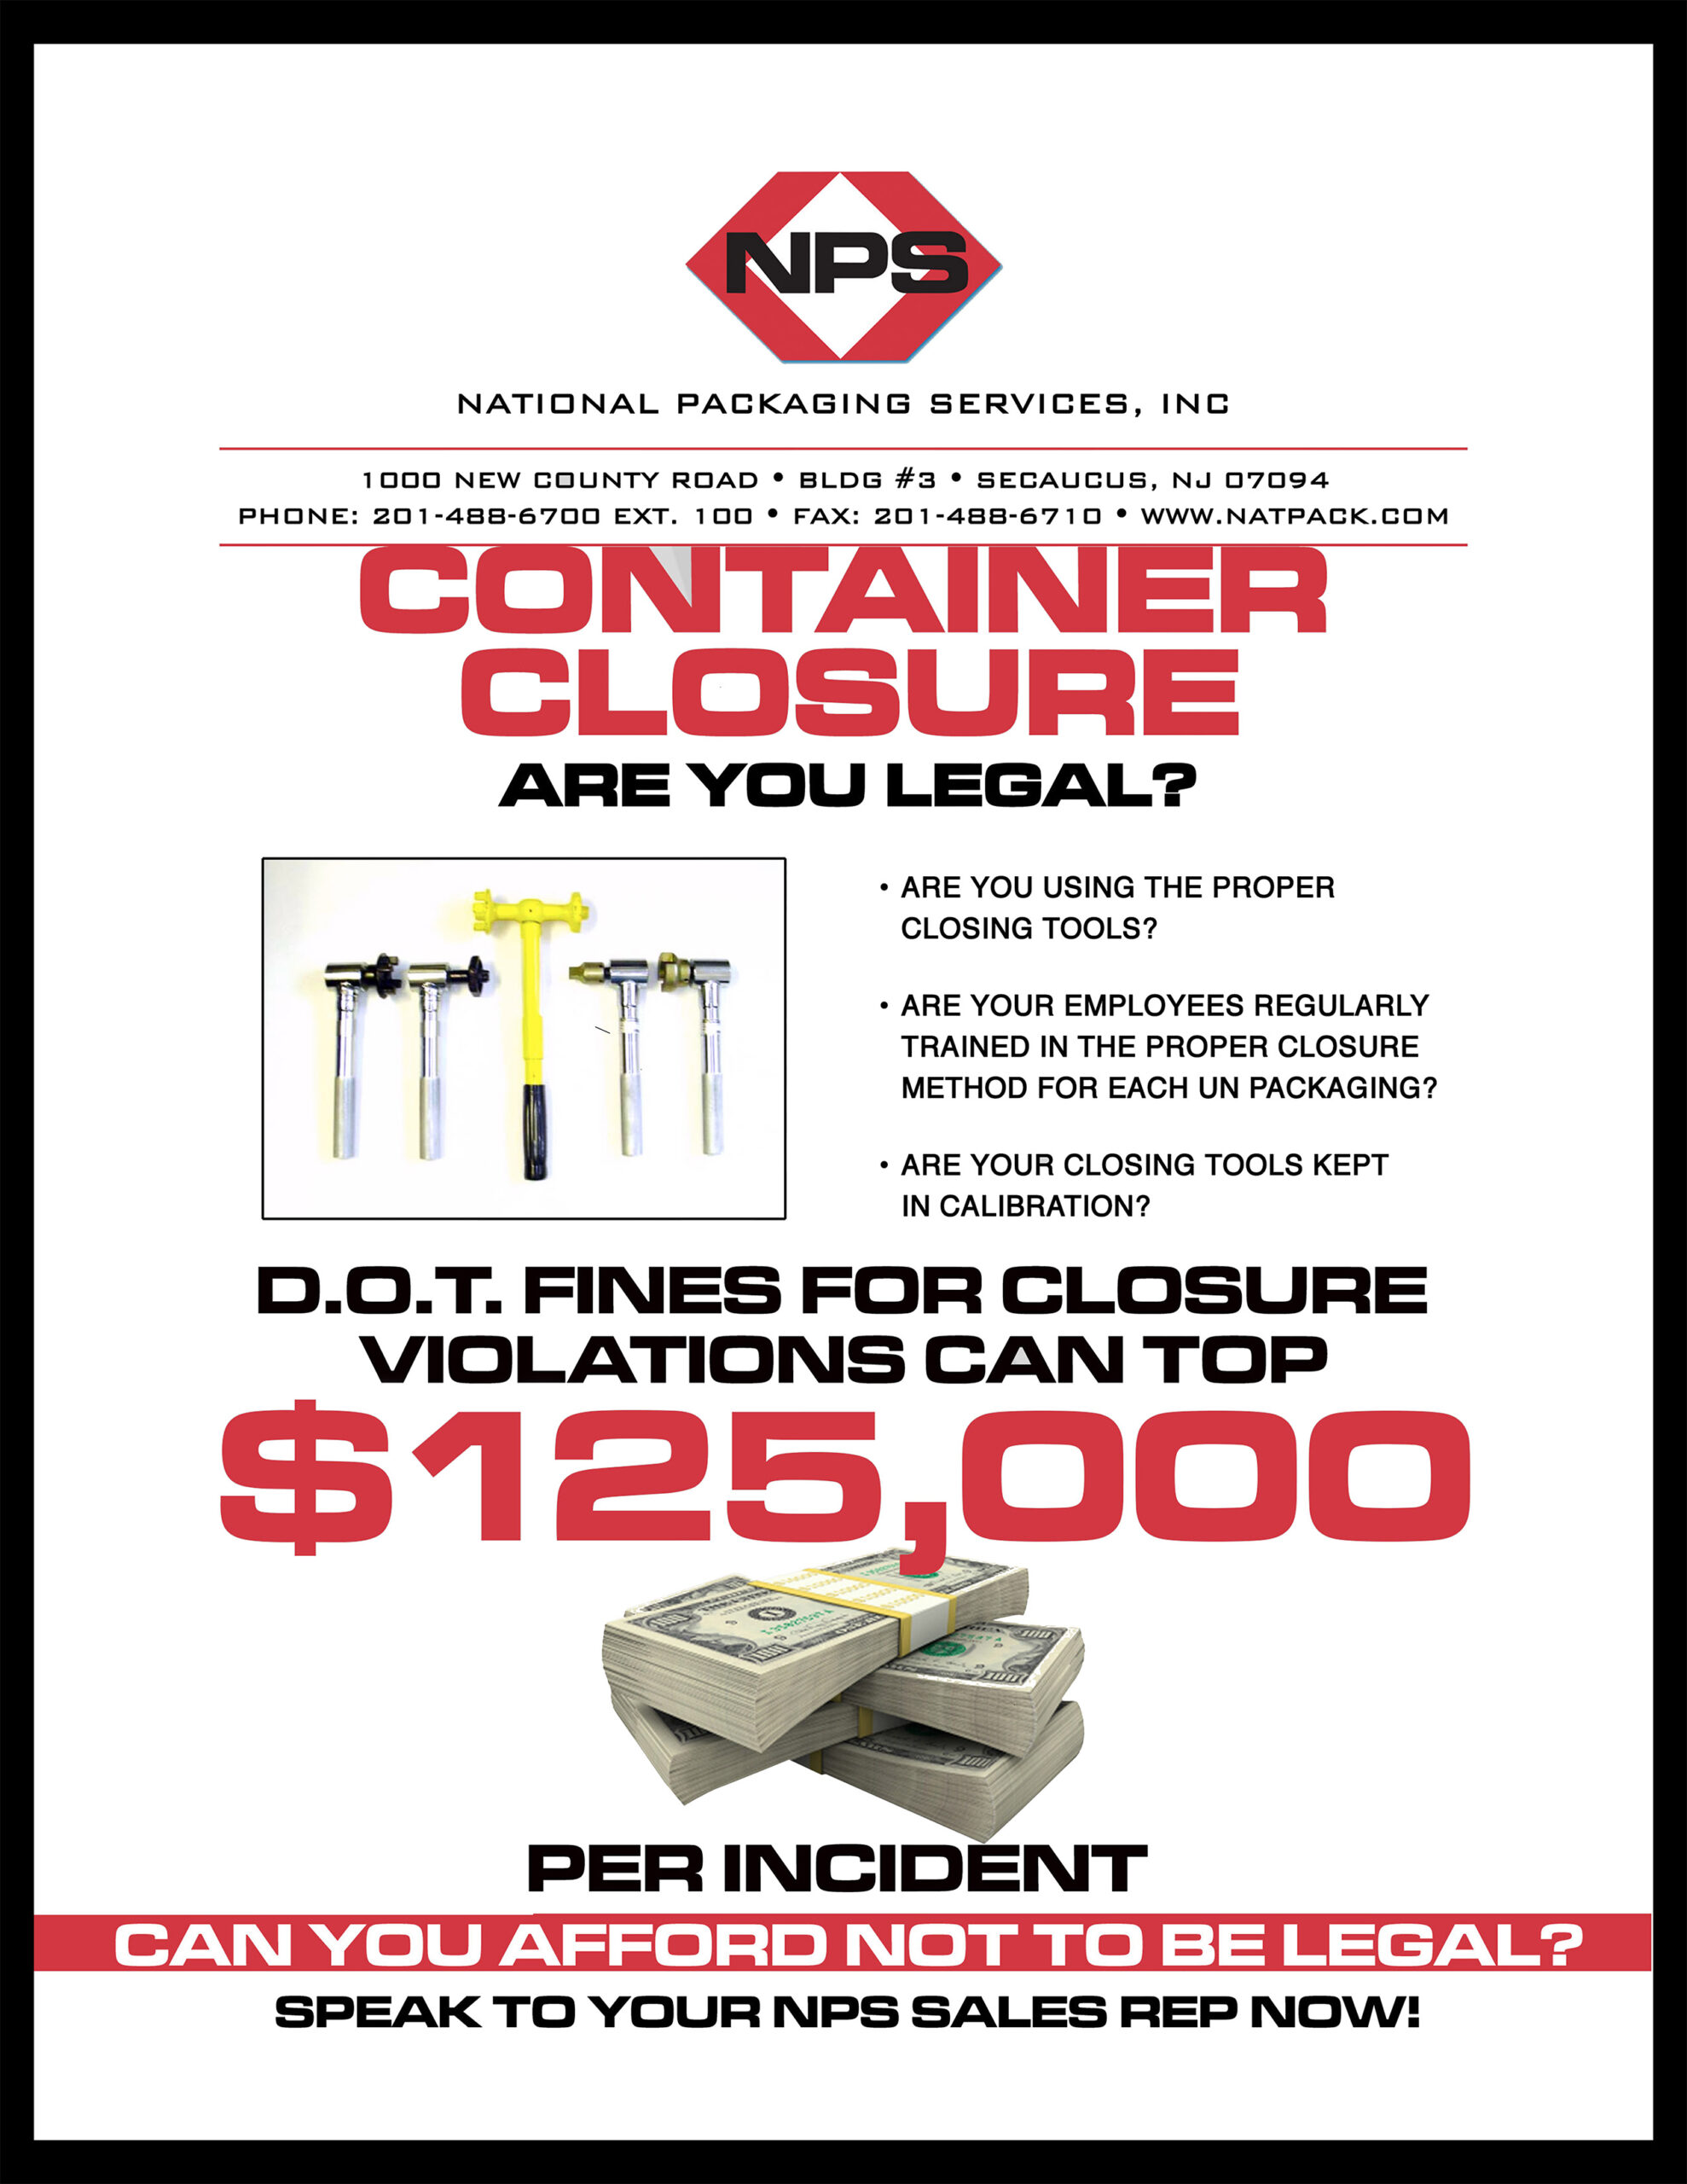 Container Closure – Are You Legal